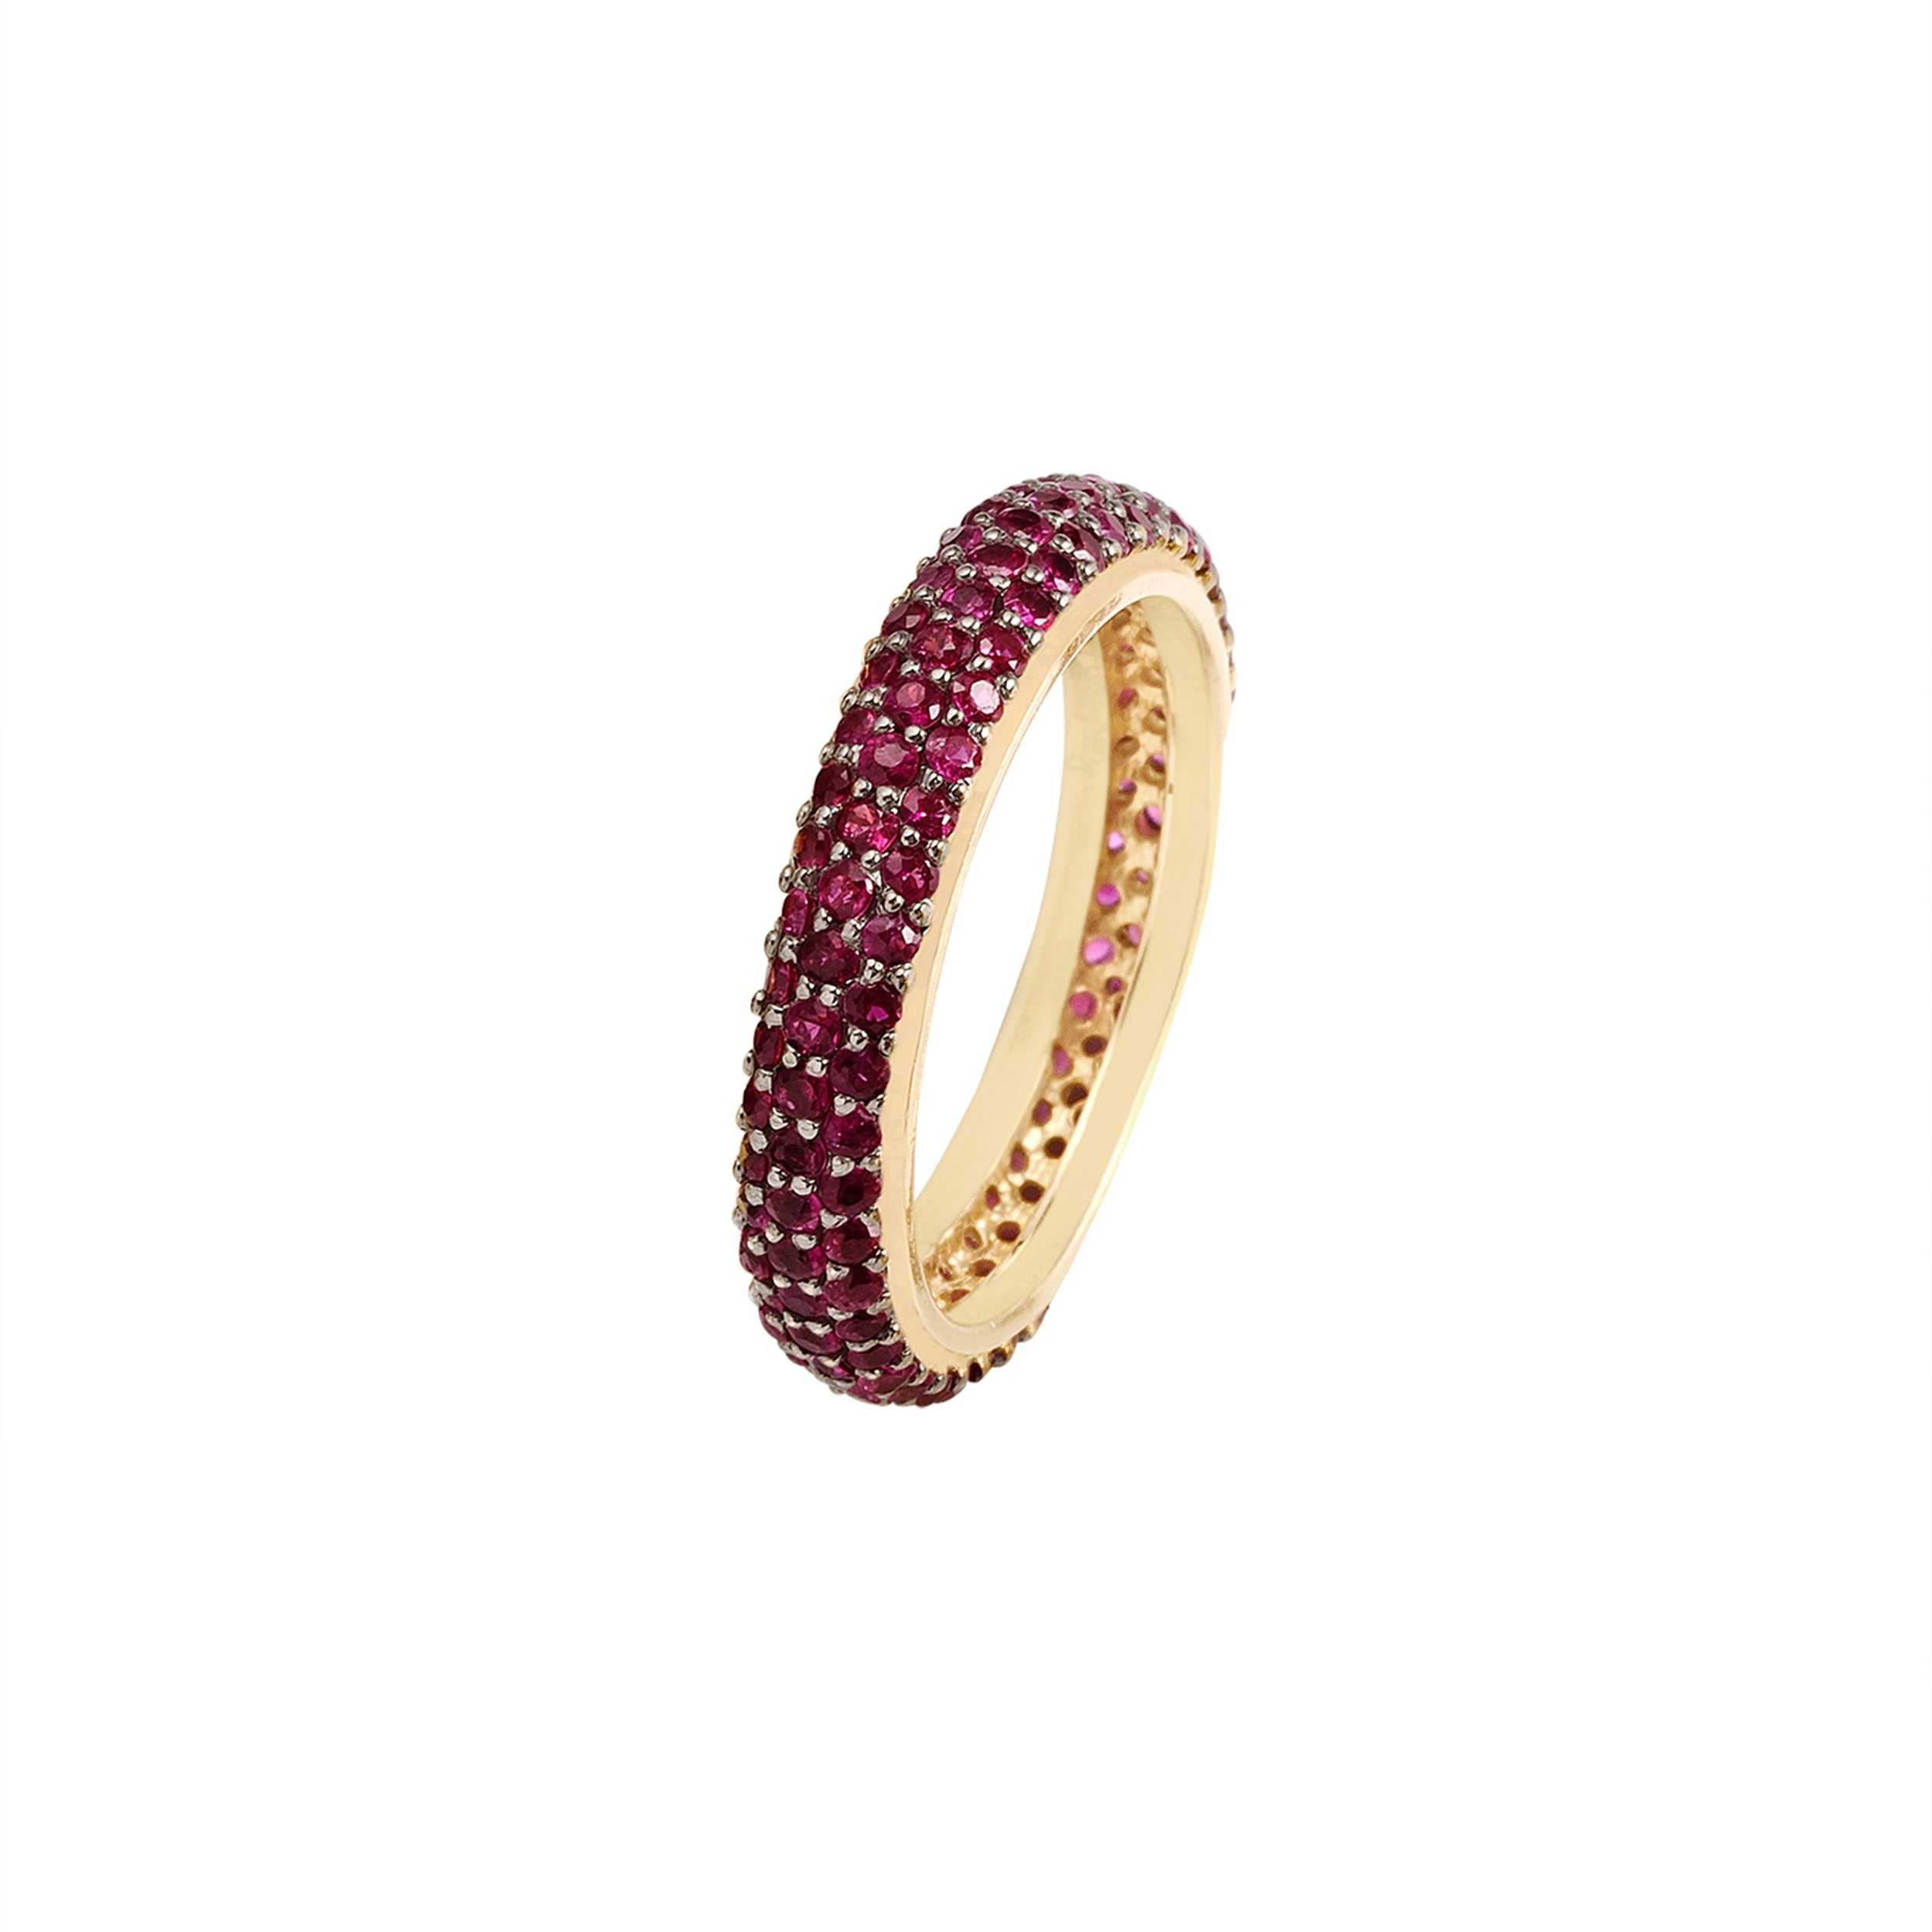 Miriams Jewelry Vintage 14kt Yellow Gold Ruby Stackable Ring; Size 4 -  Miriams Jewelry